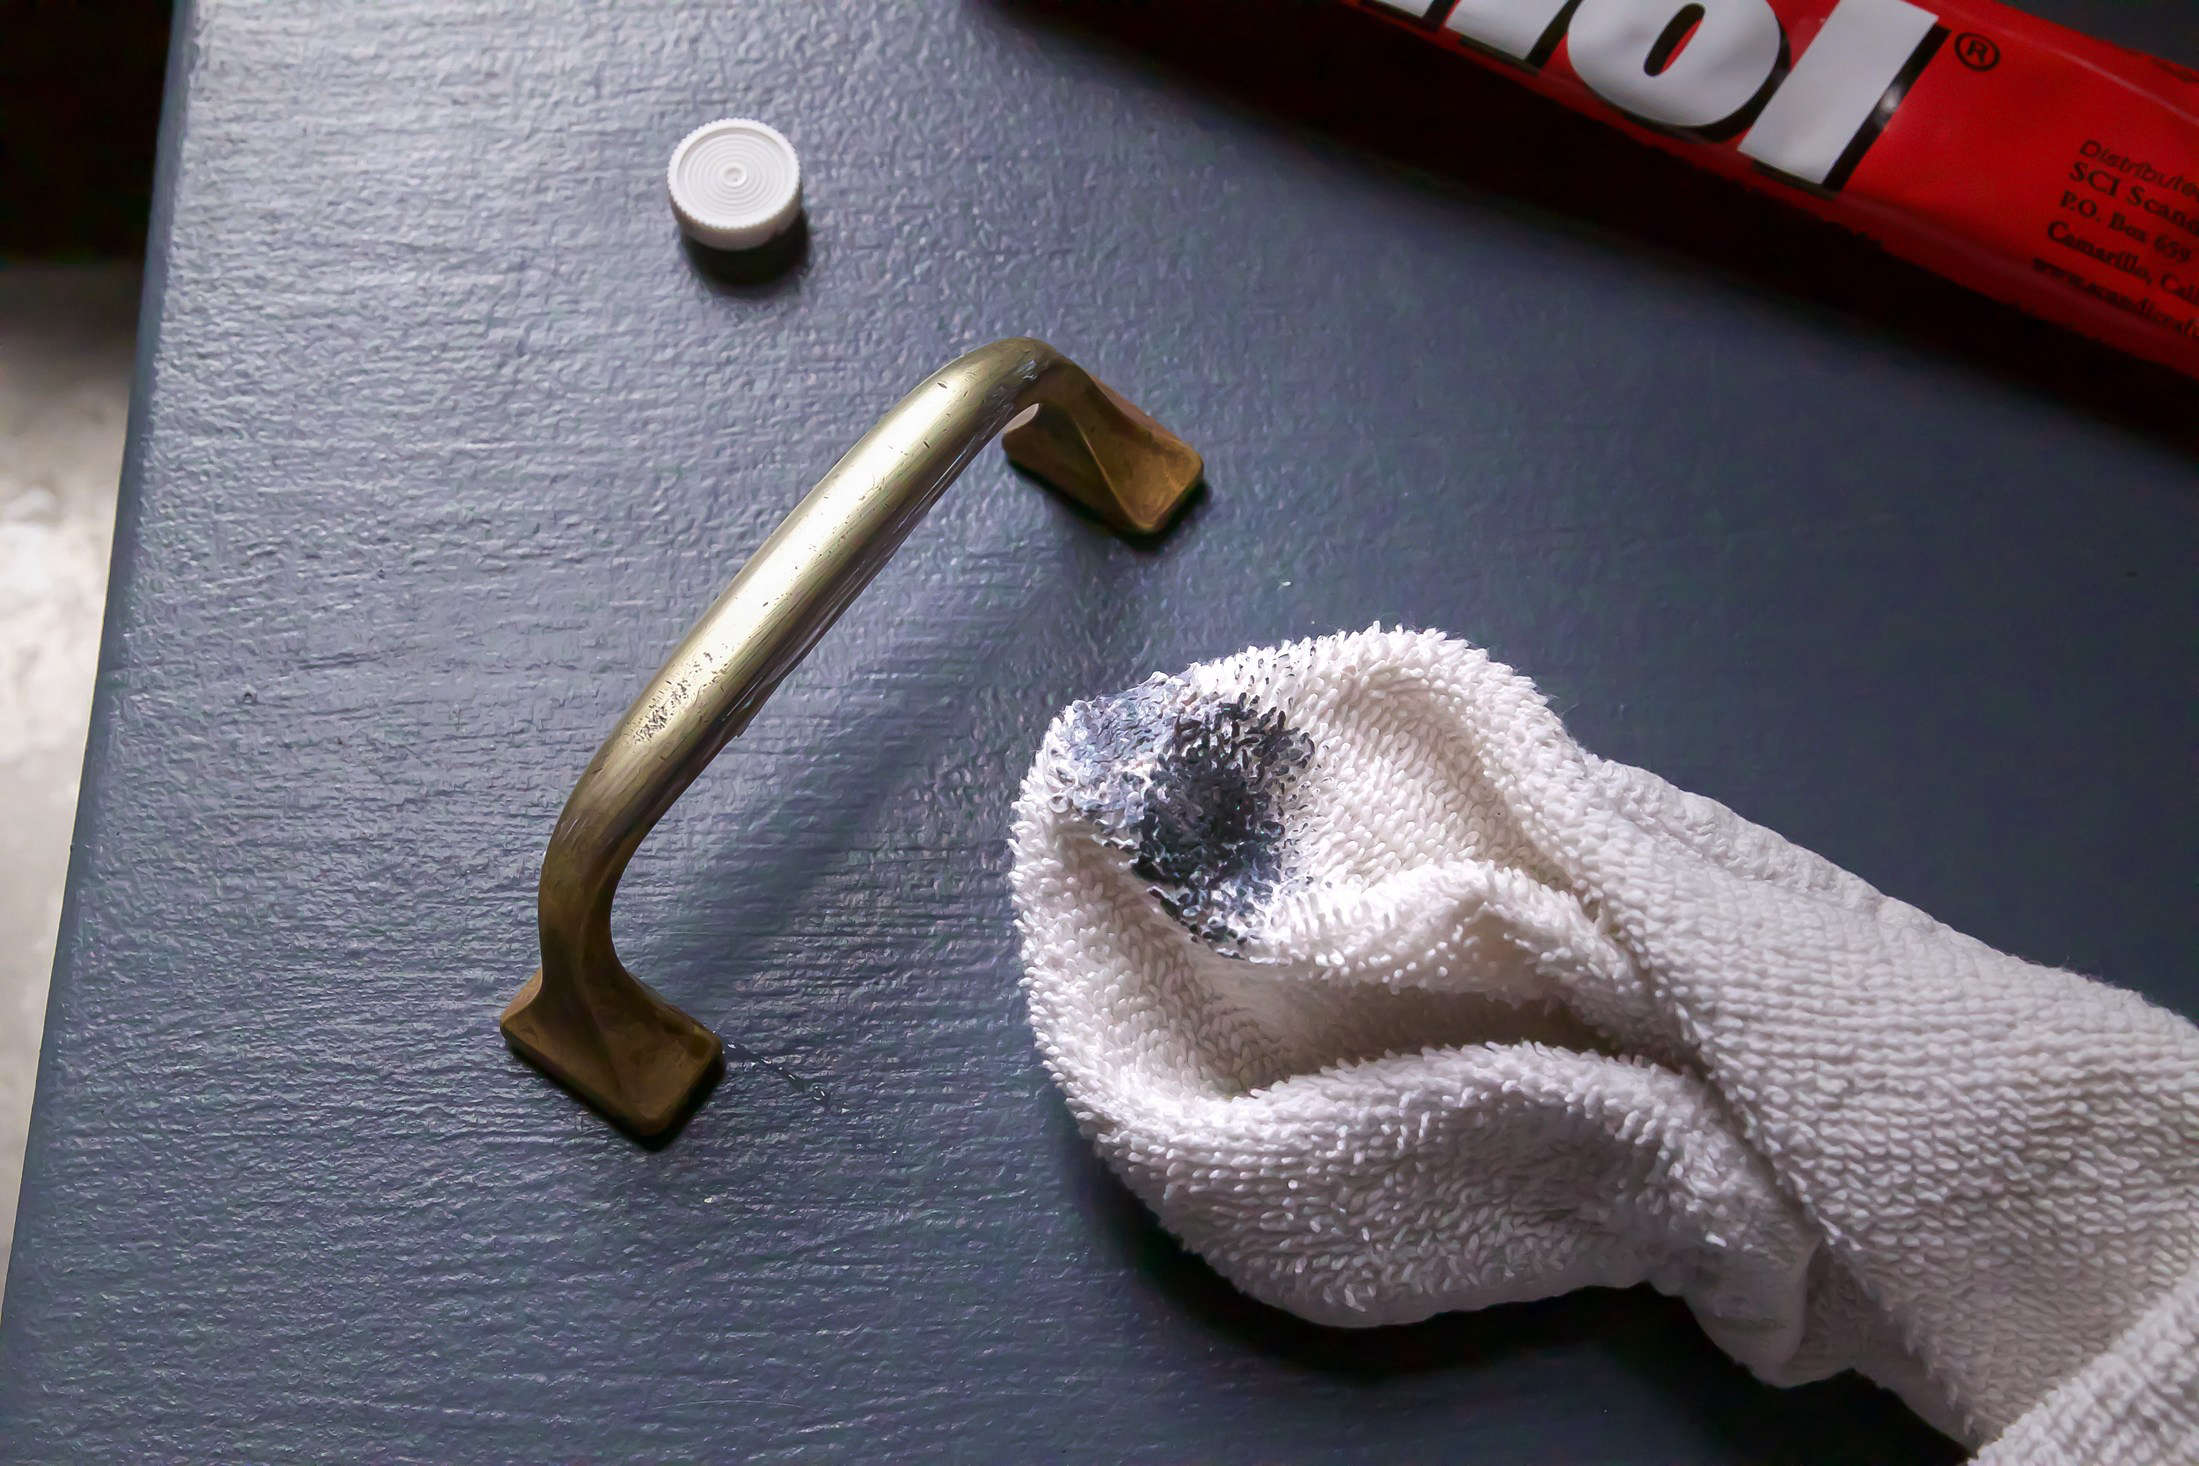 How to Remove Old Paint and Clean Brass Hardware